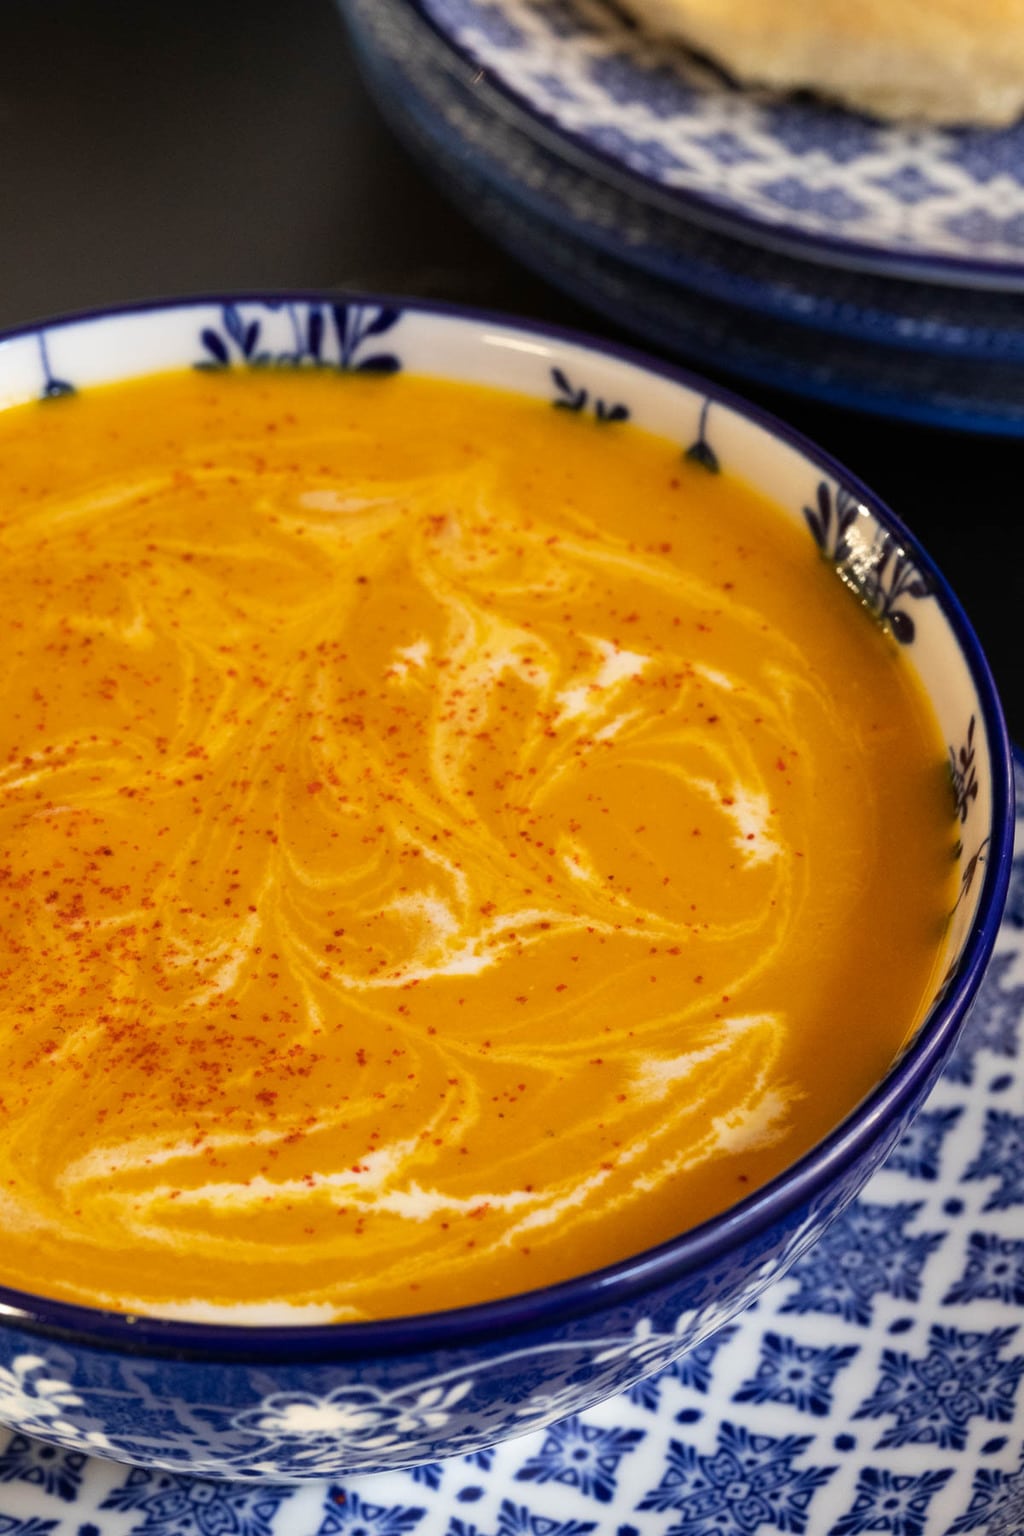 Vertical extreme closeup photo of a blue and white patterned bowl of Gingery Red Lentil Carrot Soup.